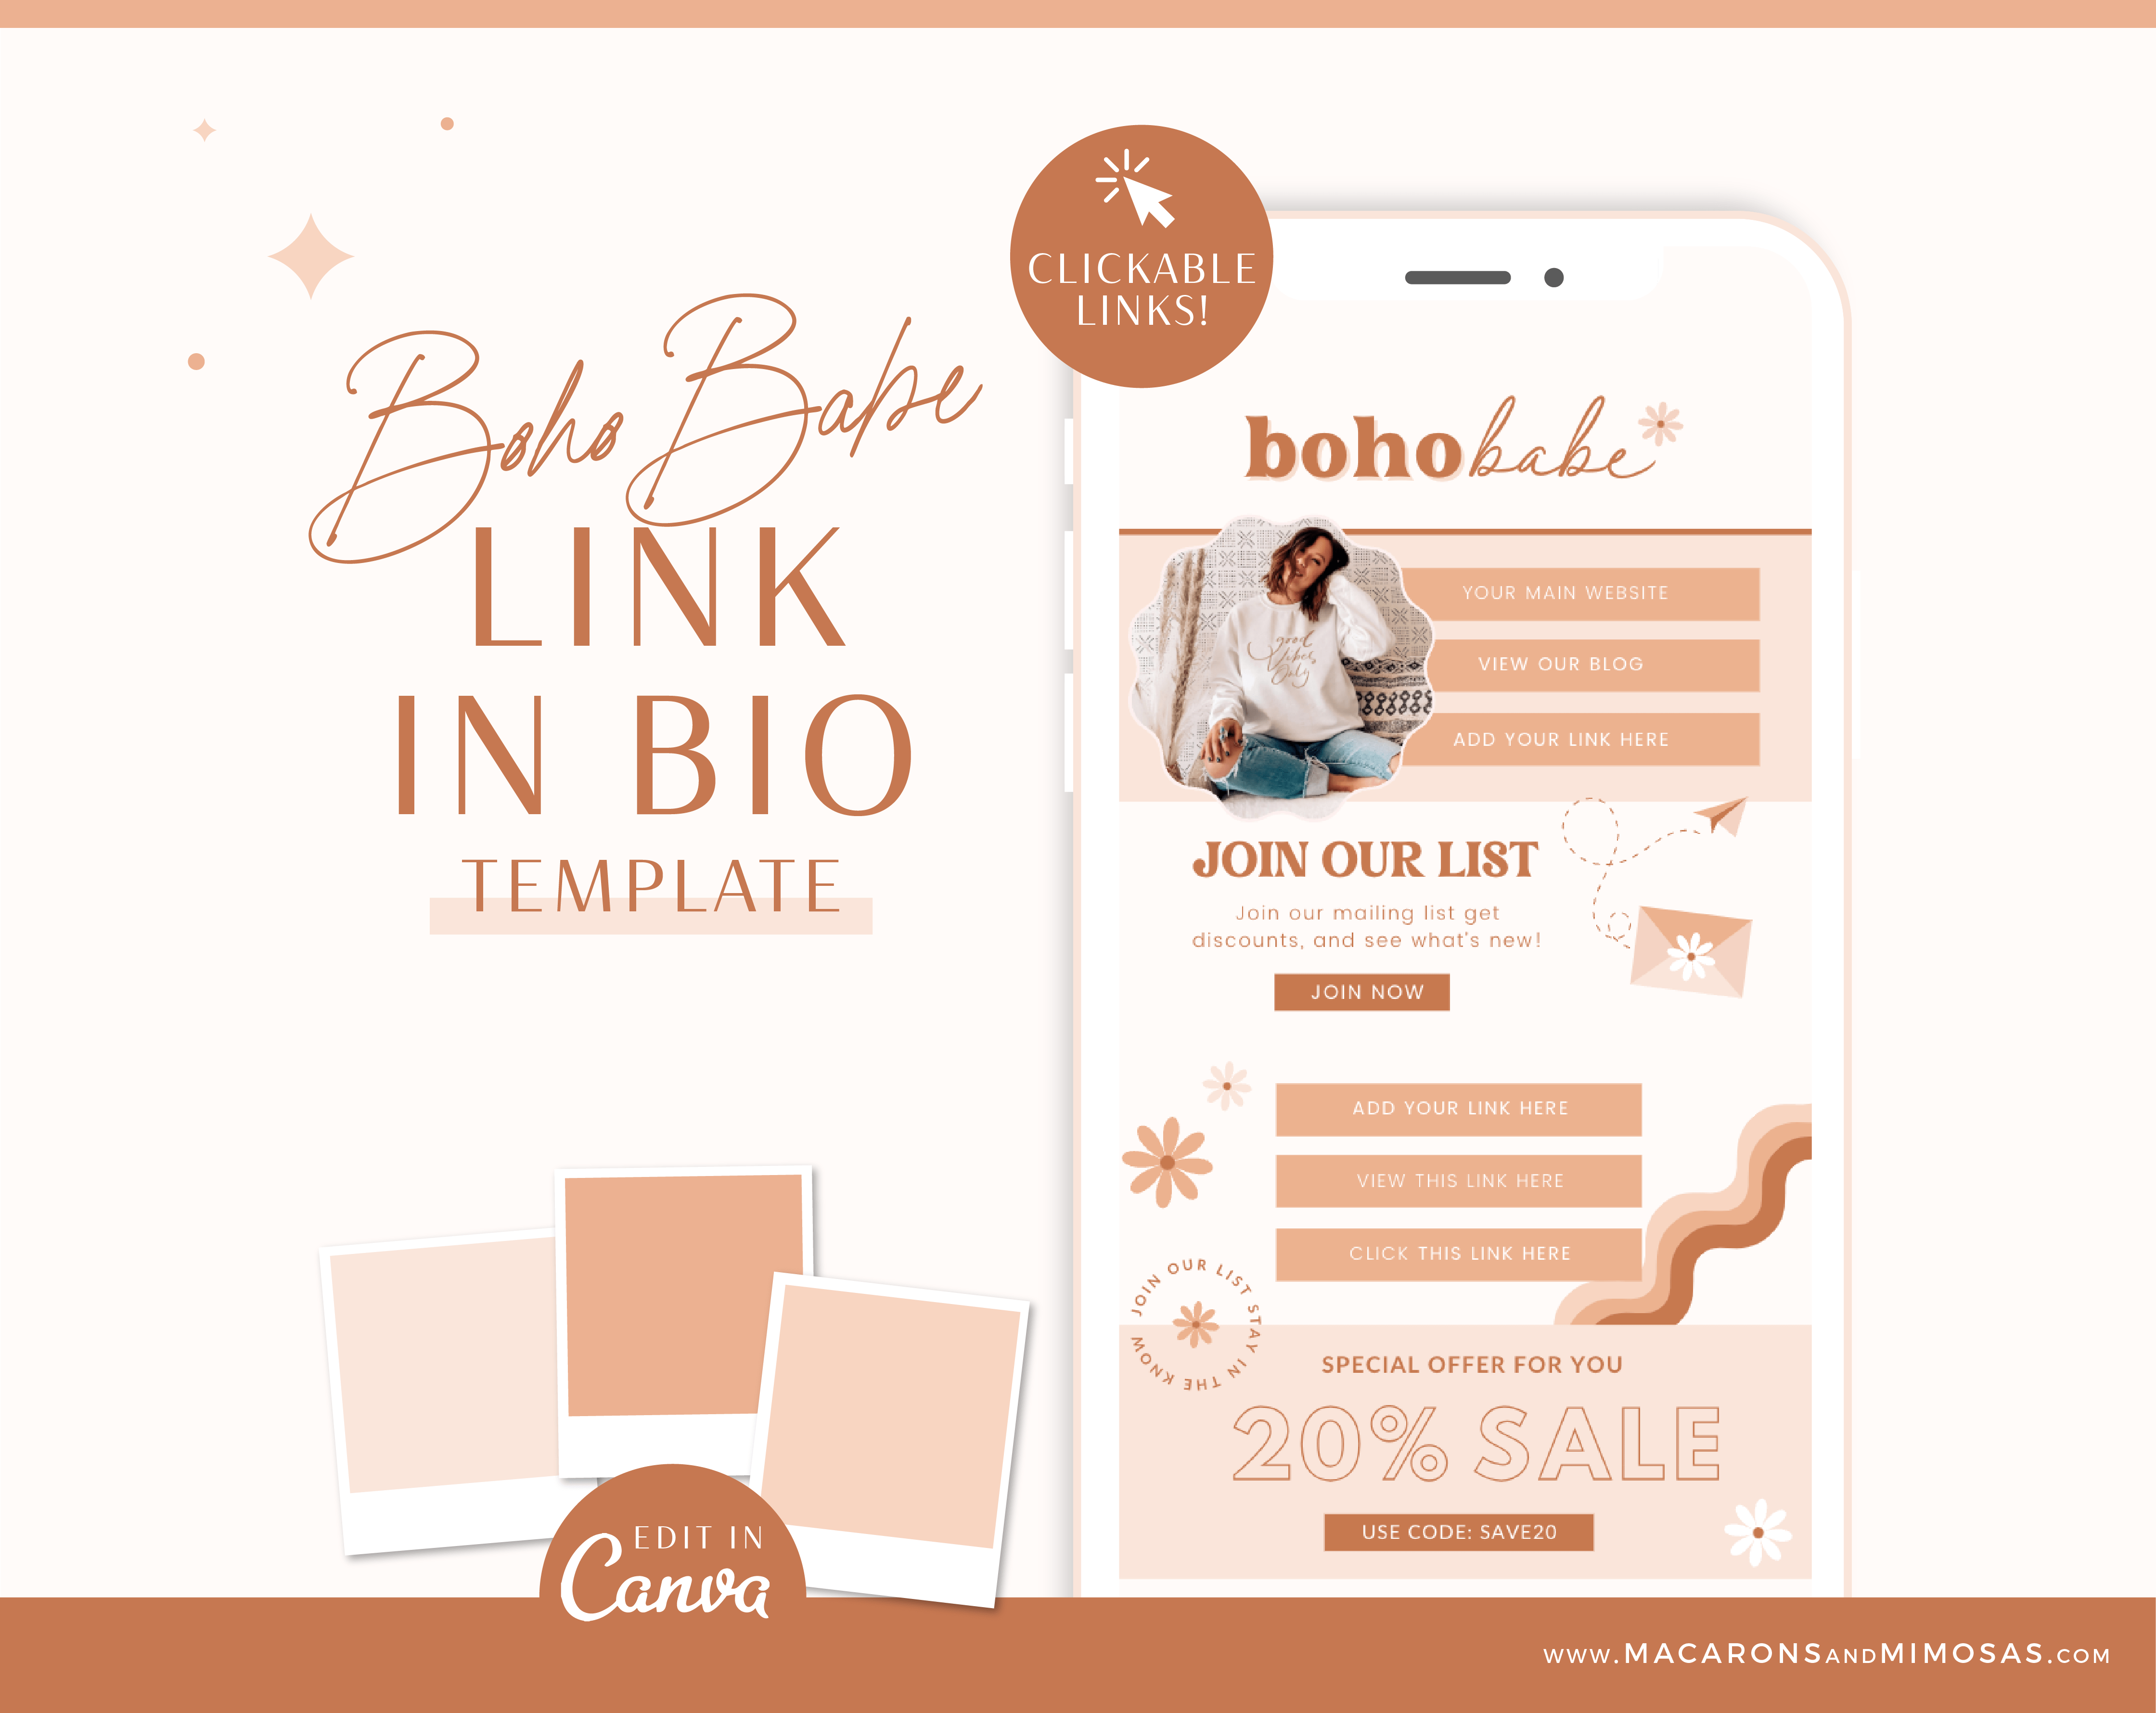 Boho Link in Bio TikTok Template for Canva, Pink Instagram Website Template, Ditch LinkTree One-page scrolling Microsite for Instagram Profile